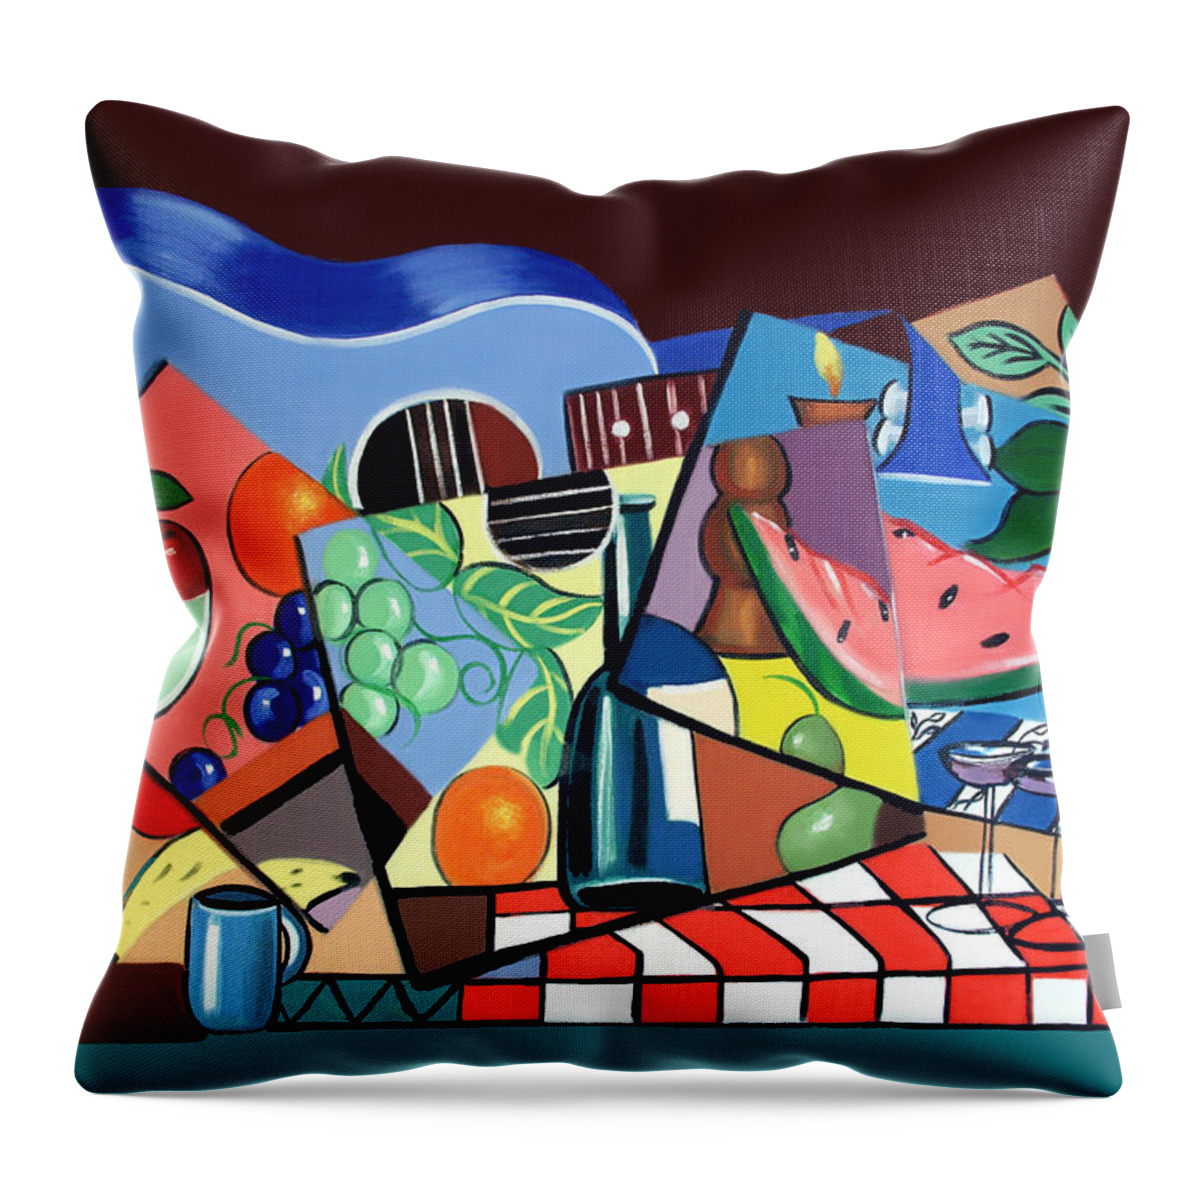 The Blue Guitar Throw Pillow featuring the painting The Blue Guitar by Anthony Falbo